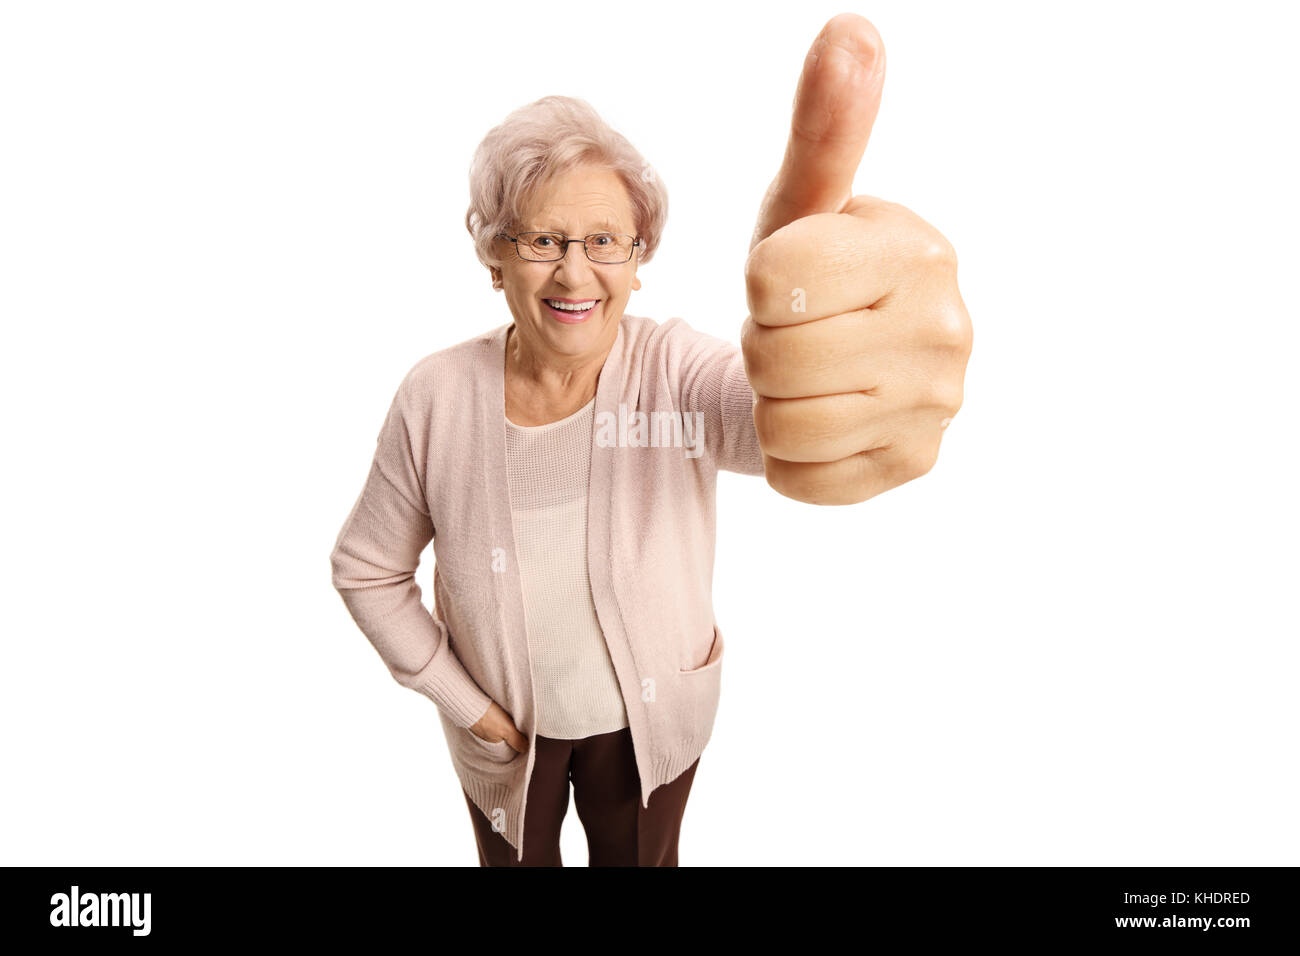 Elderly woman making a thumb up sign and smiling isolated on white background Stock Photo